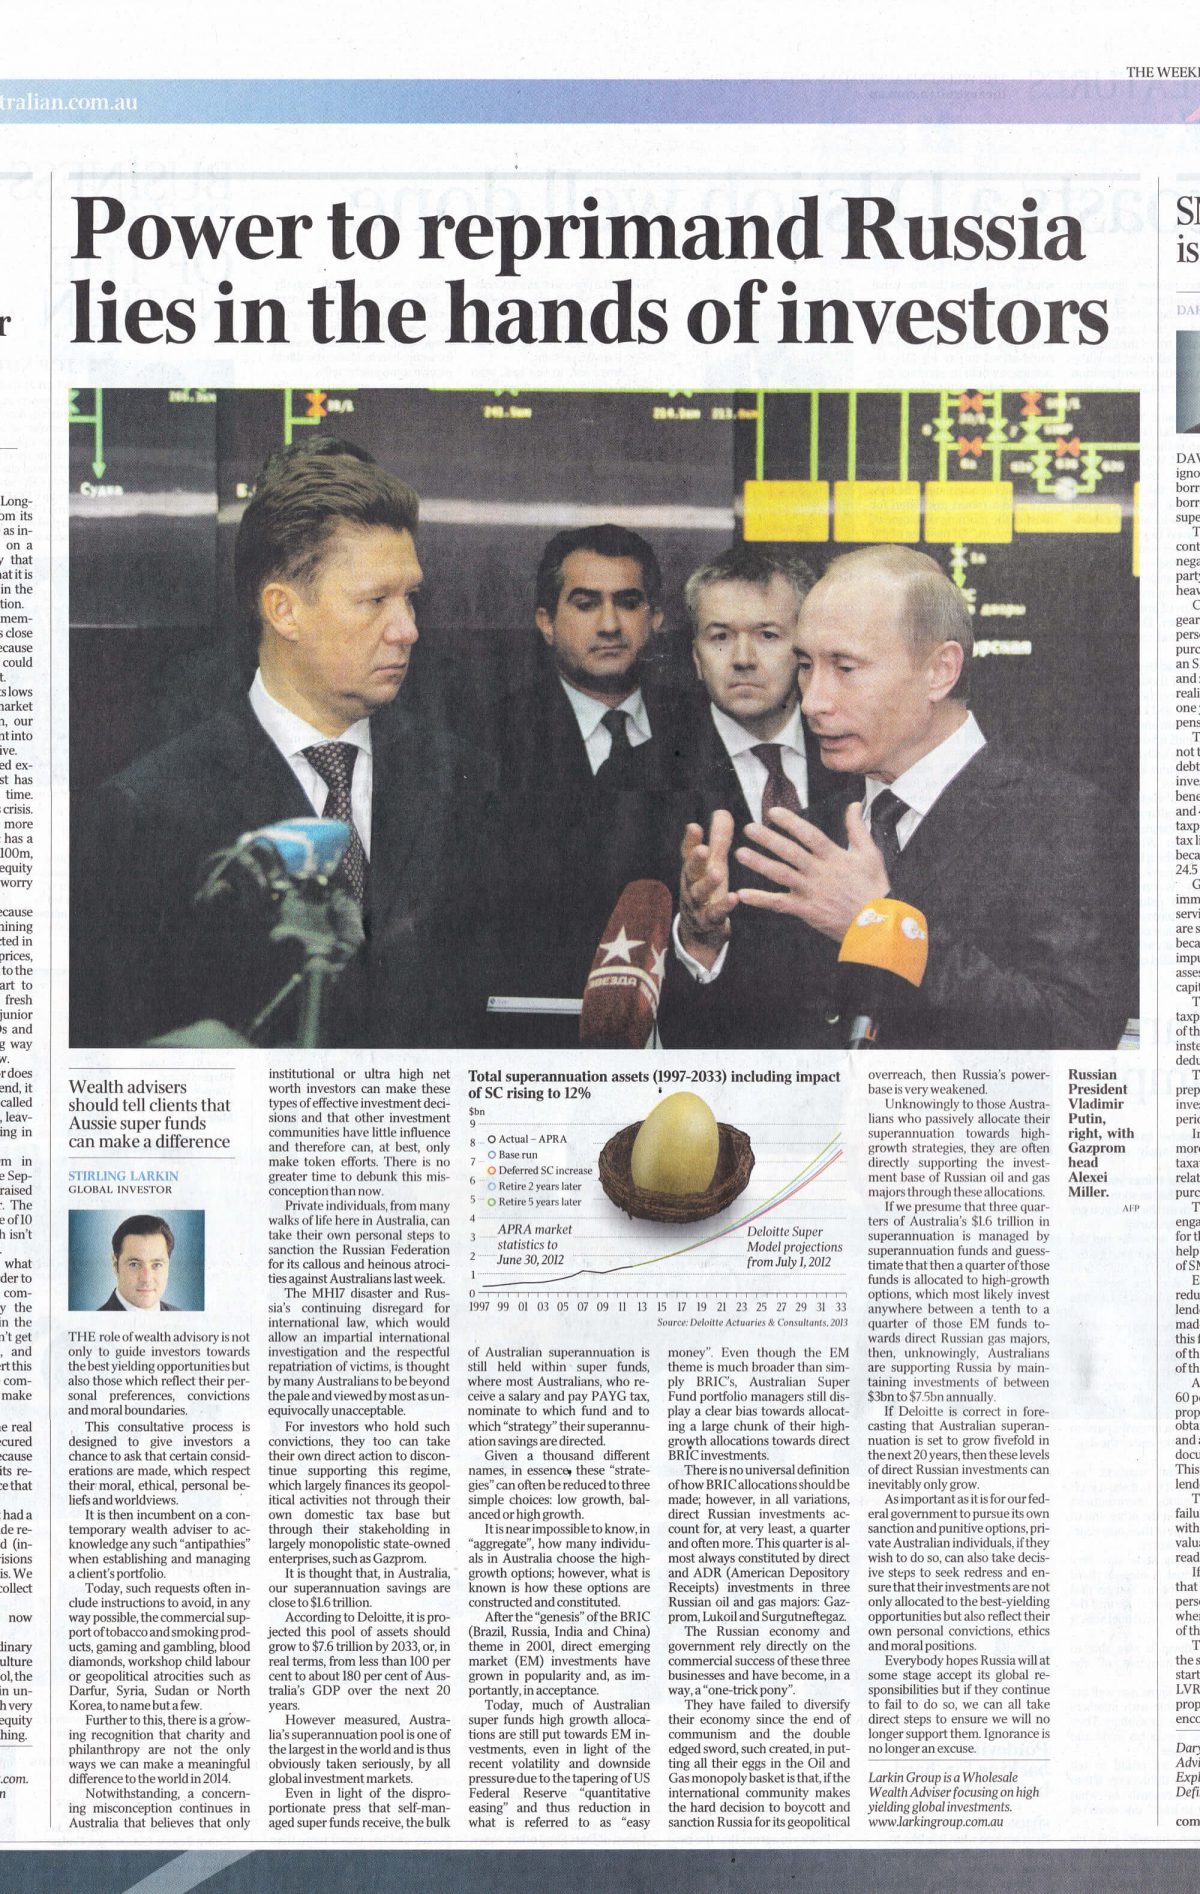 australian standfirst discusses russia in 2014 in the australian newspaper